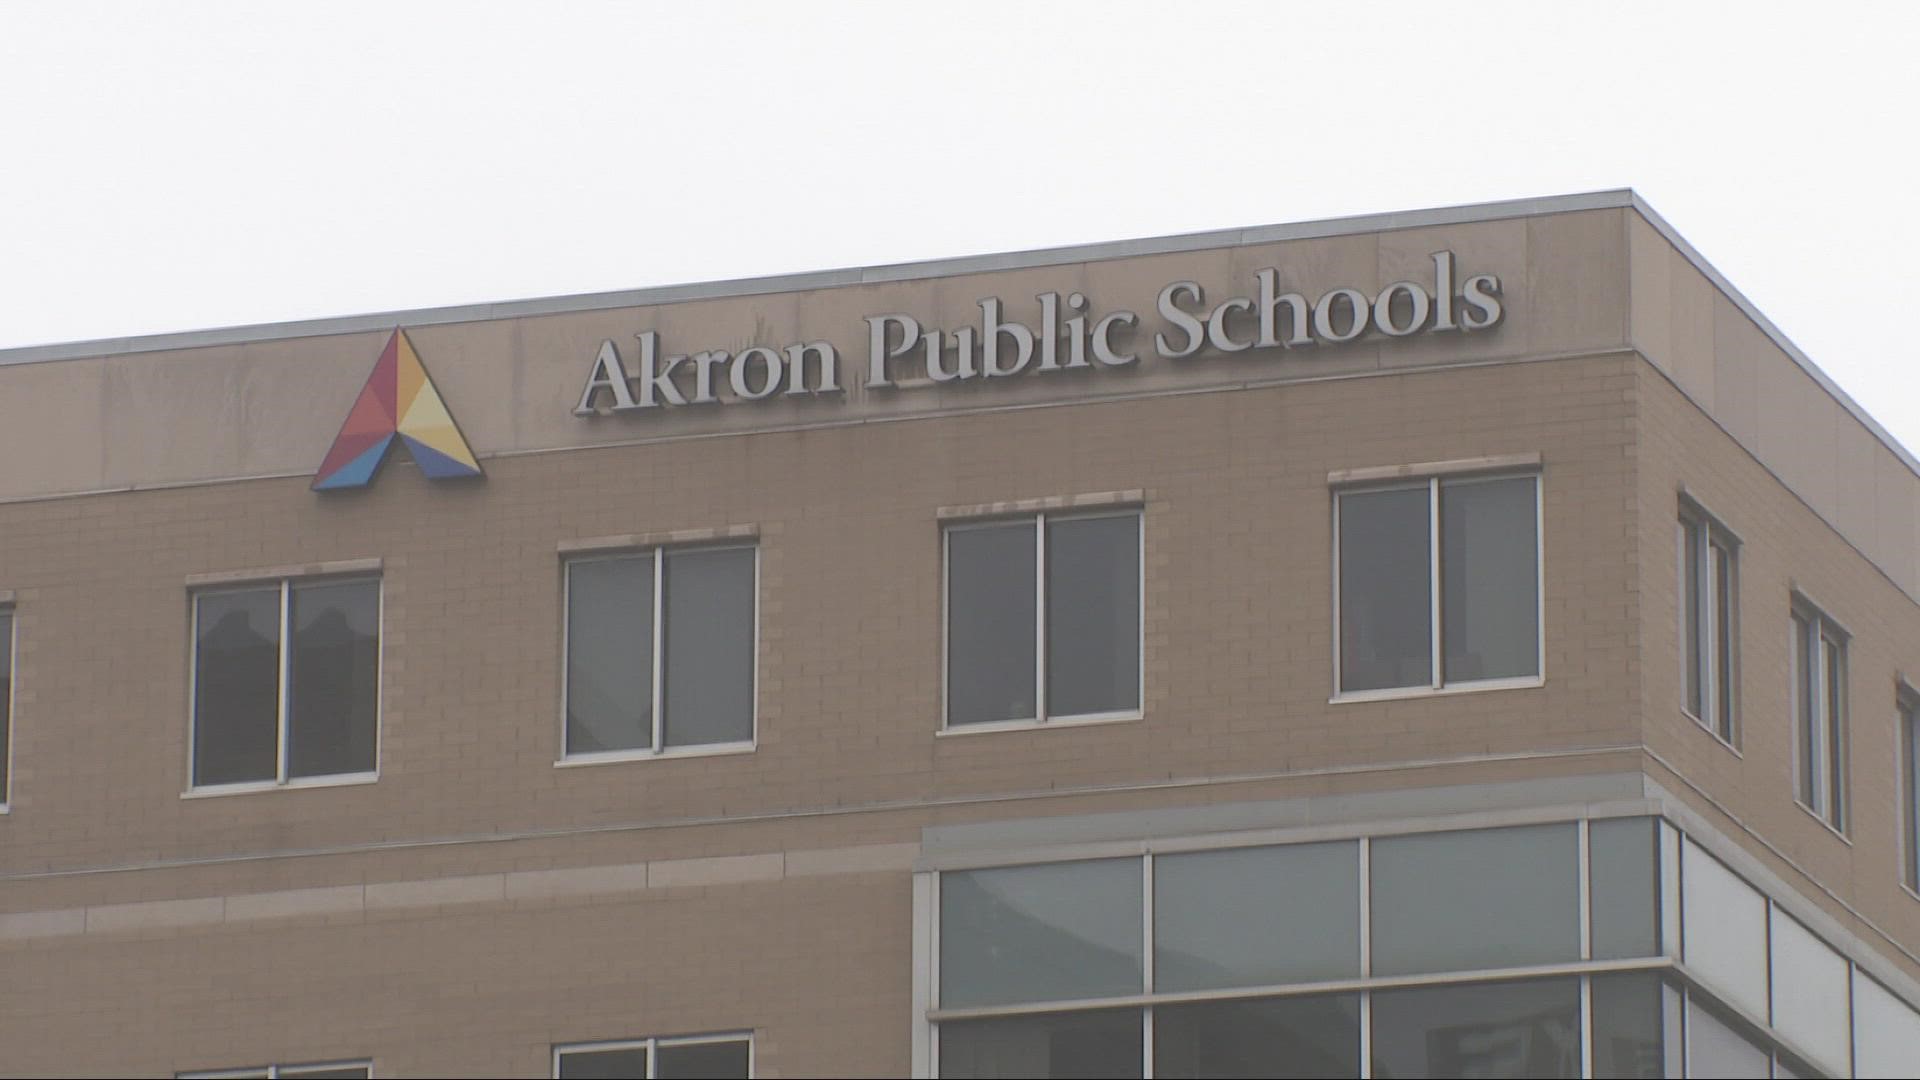 If the strike takes place, it will be the district's first in over 30 years. The school board approved hiring a third-party company help with staffing and security.